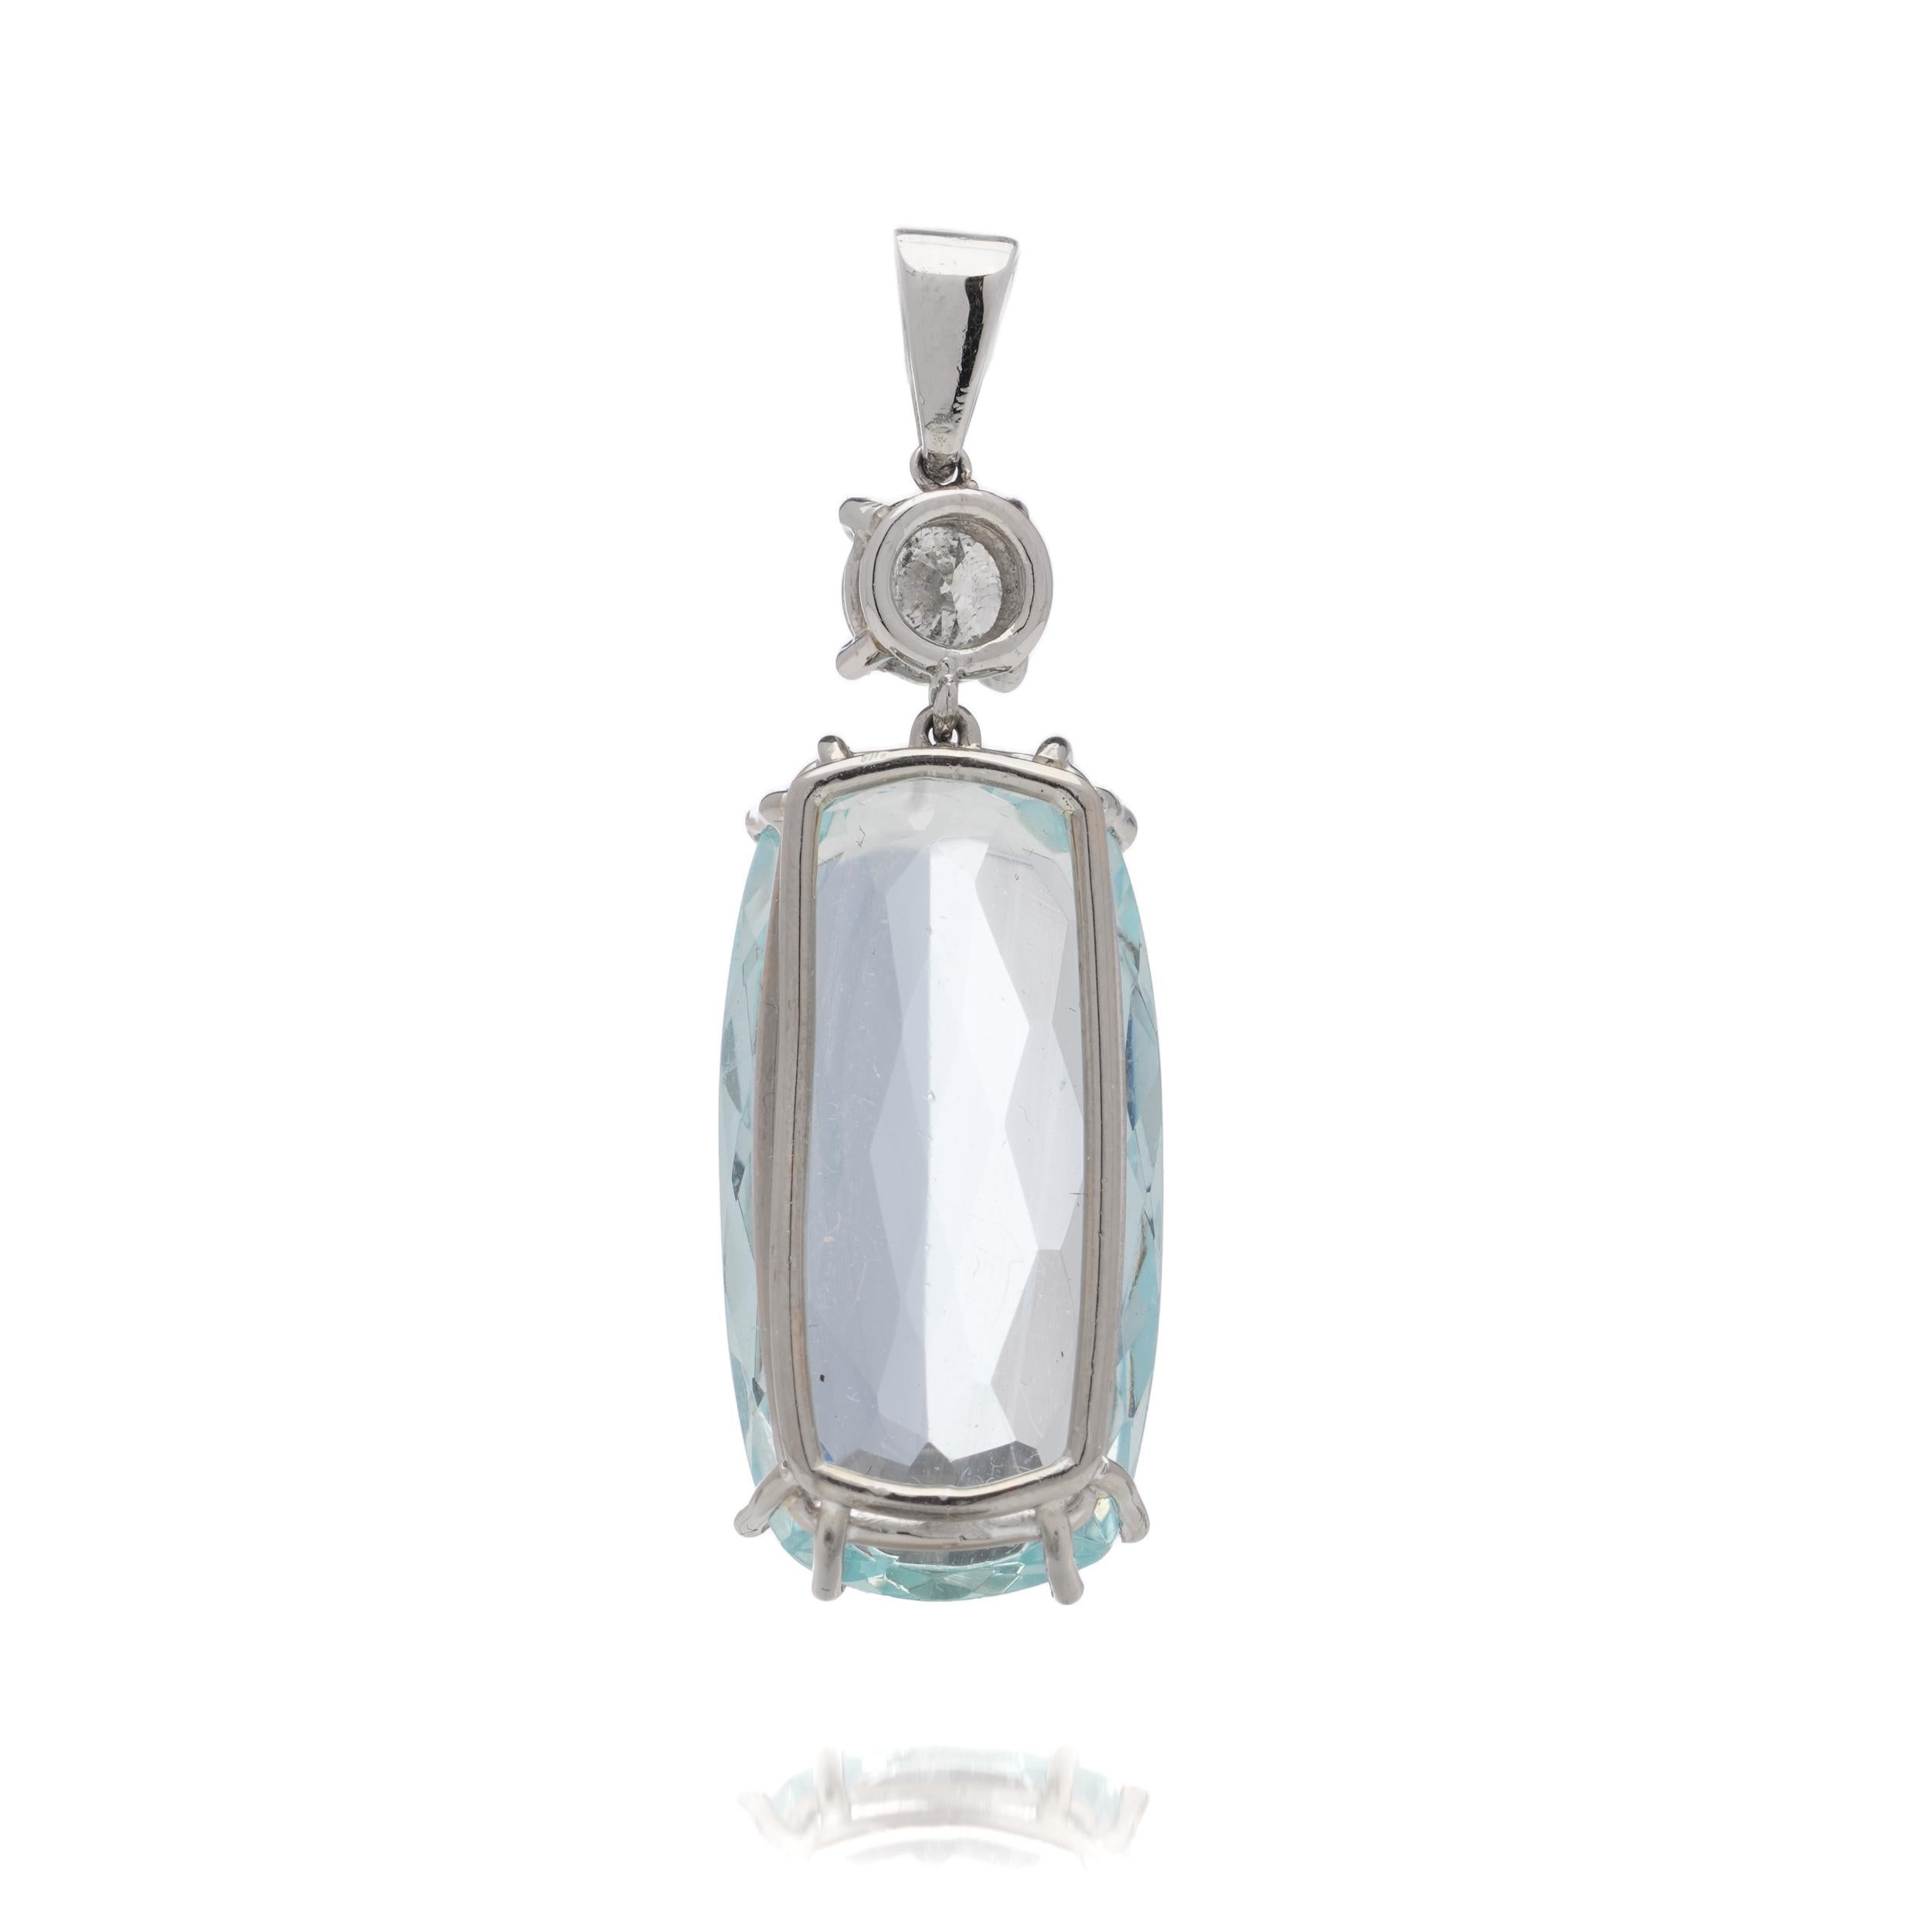 18kt white gold pendant with 8.68 cts Aquamarine and 0.50 carats of round brilli For Sale 2